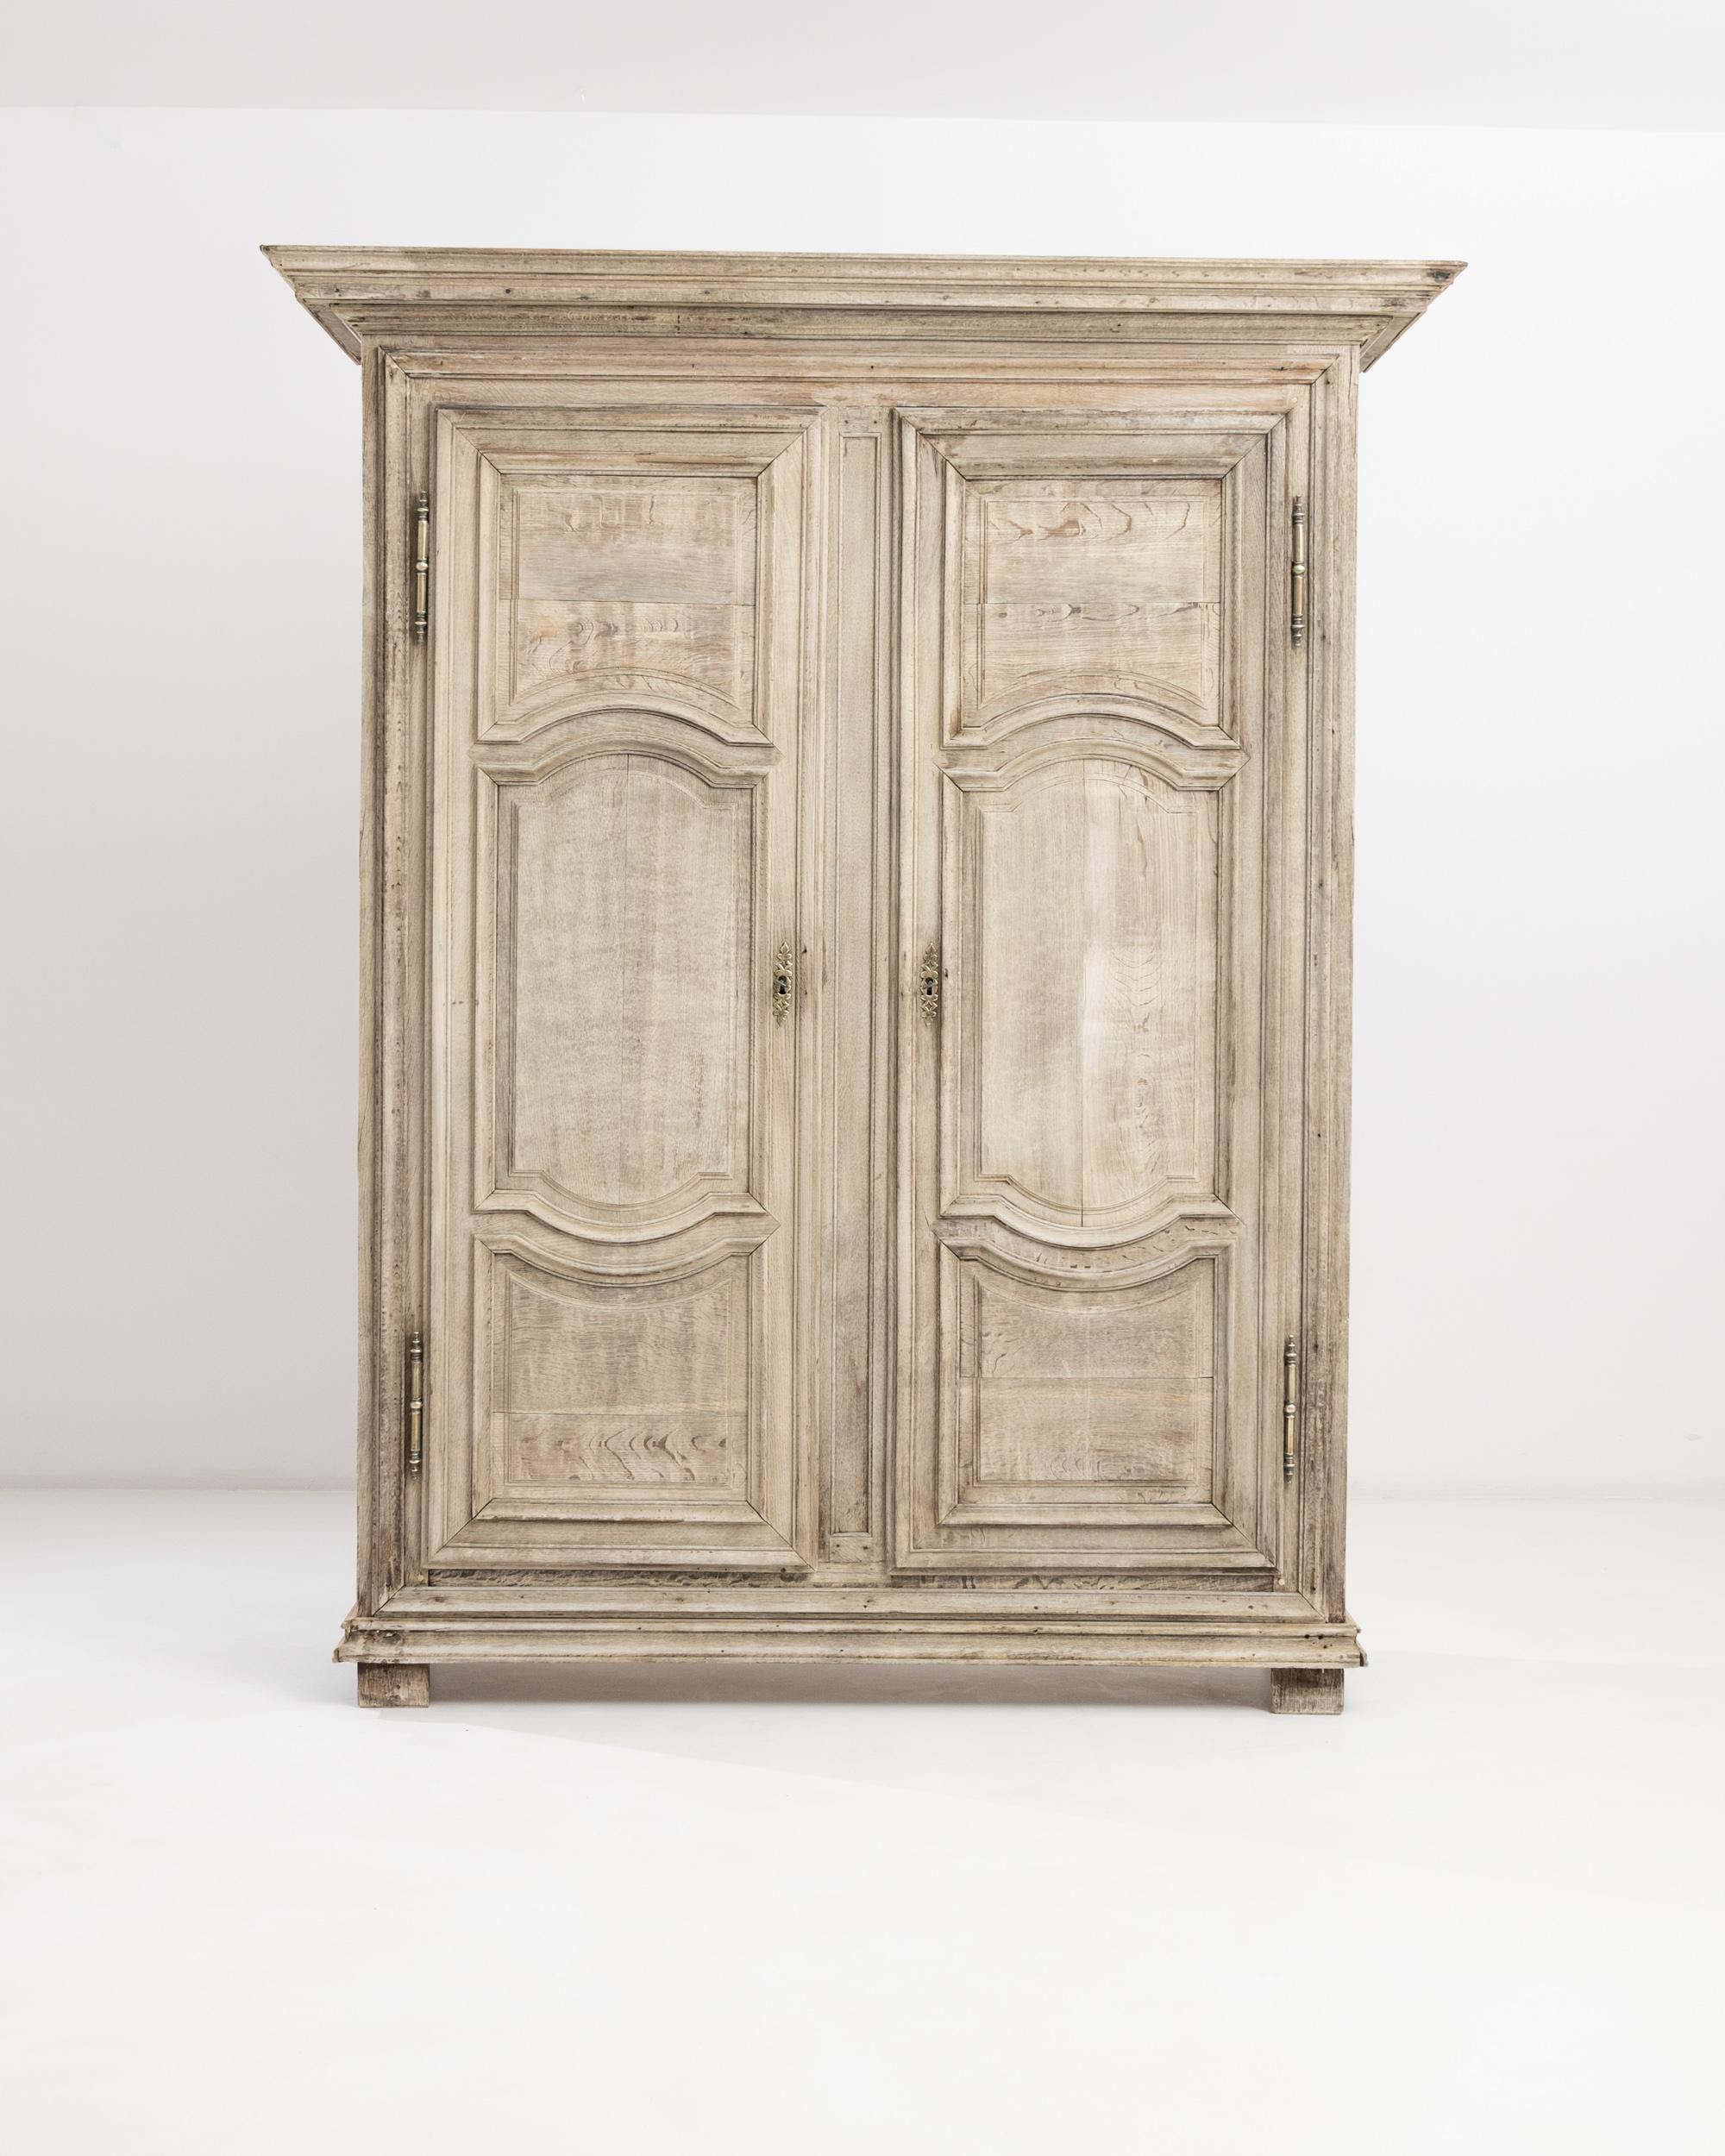 Grand proportions and beautiful panelling make this antique oak armoire a magnificent find. Made in France circa 1800 in the style of Louis XIV, the quality of the cabinetwork is visible in the deep relief of the contoured moldings and the graceful